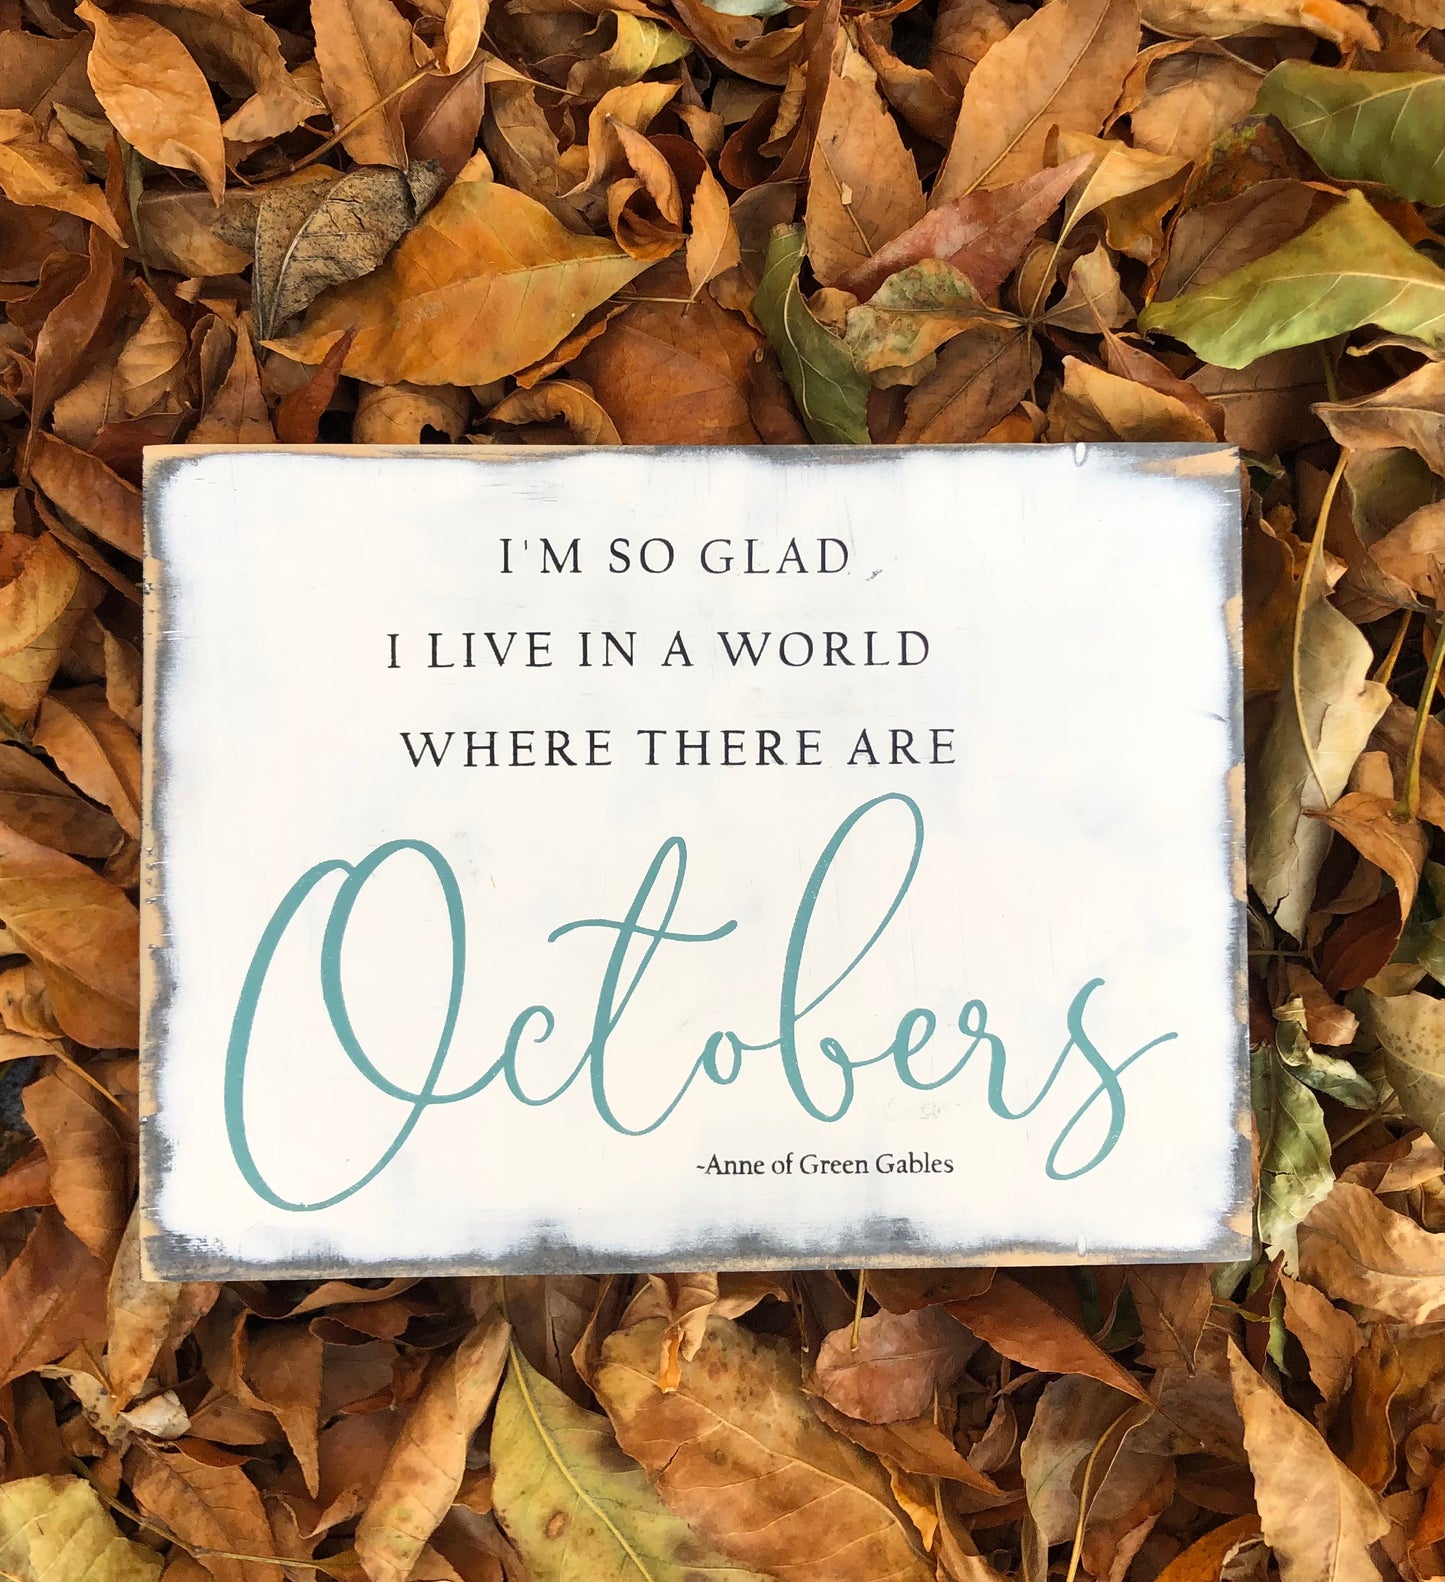 I'M SO GLAD I LIVE IN A WORLD WHERE THERE ARE OCTOBERS